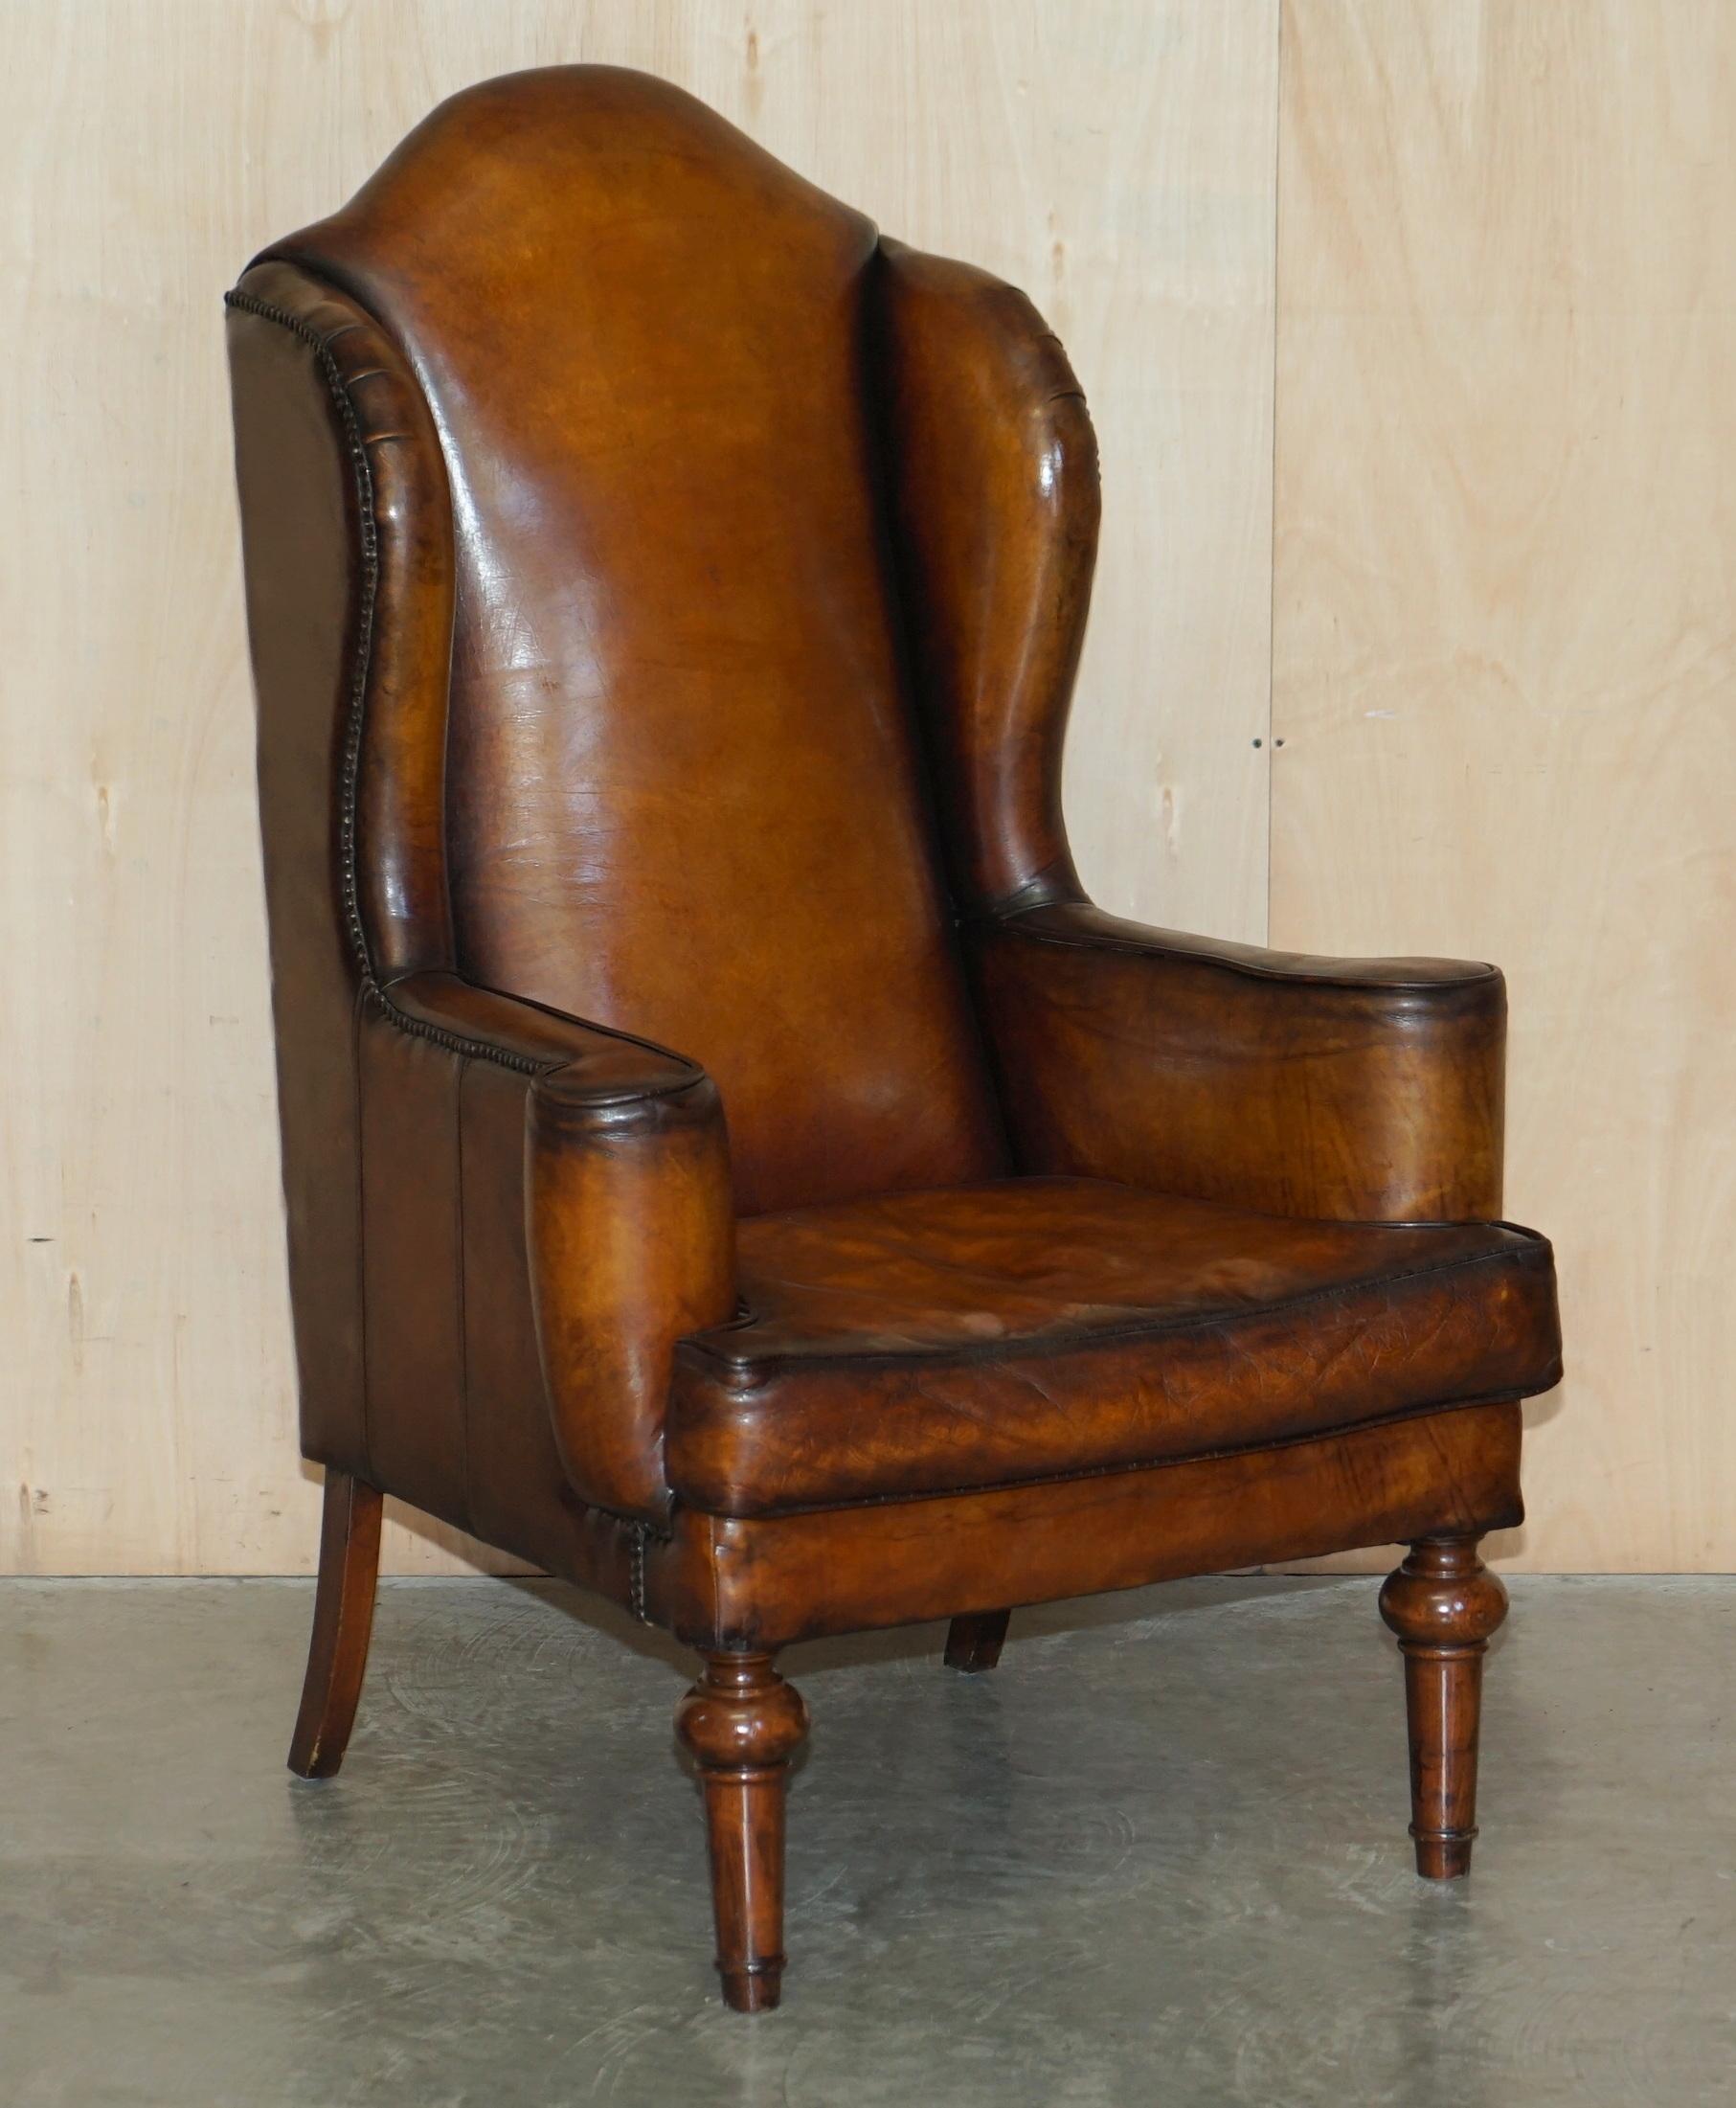 We are delighted to offer for sale this very rare pair of large, fully restored vintage William Morris style hand dyed cigar brown leather wingback armchairs with oak frames

These chairs are very fine examples, they have elegant long oak turned